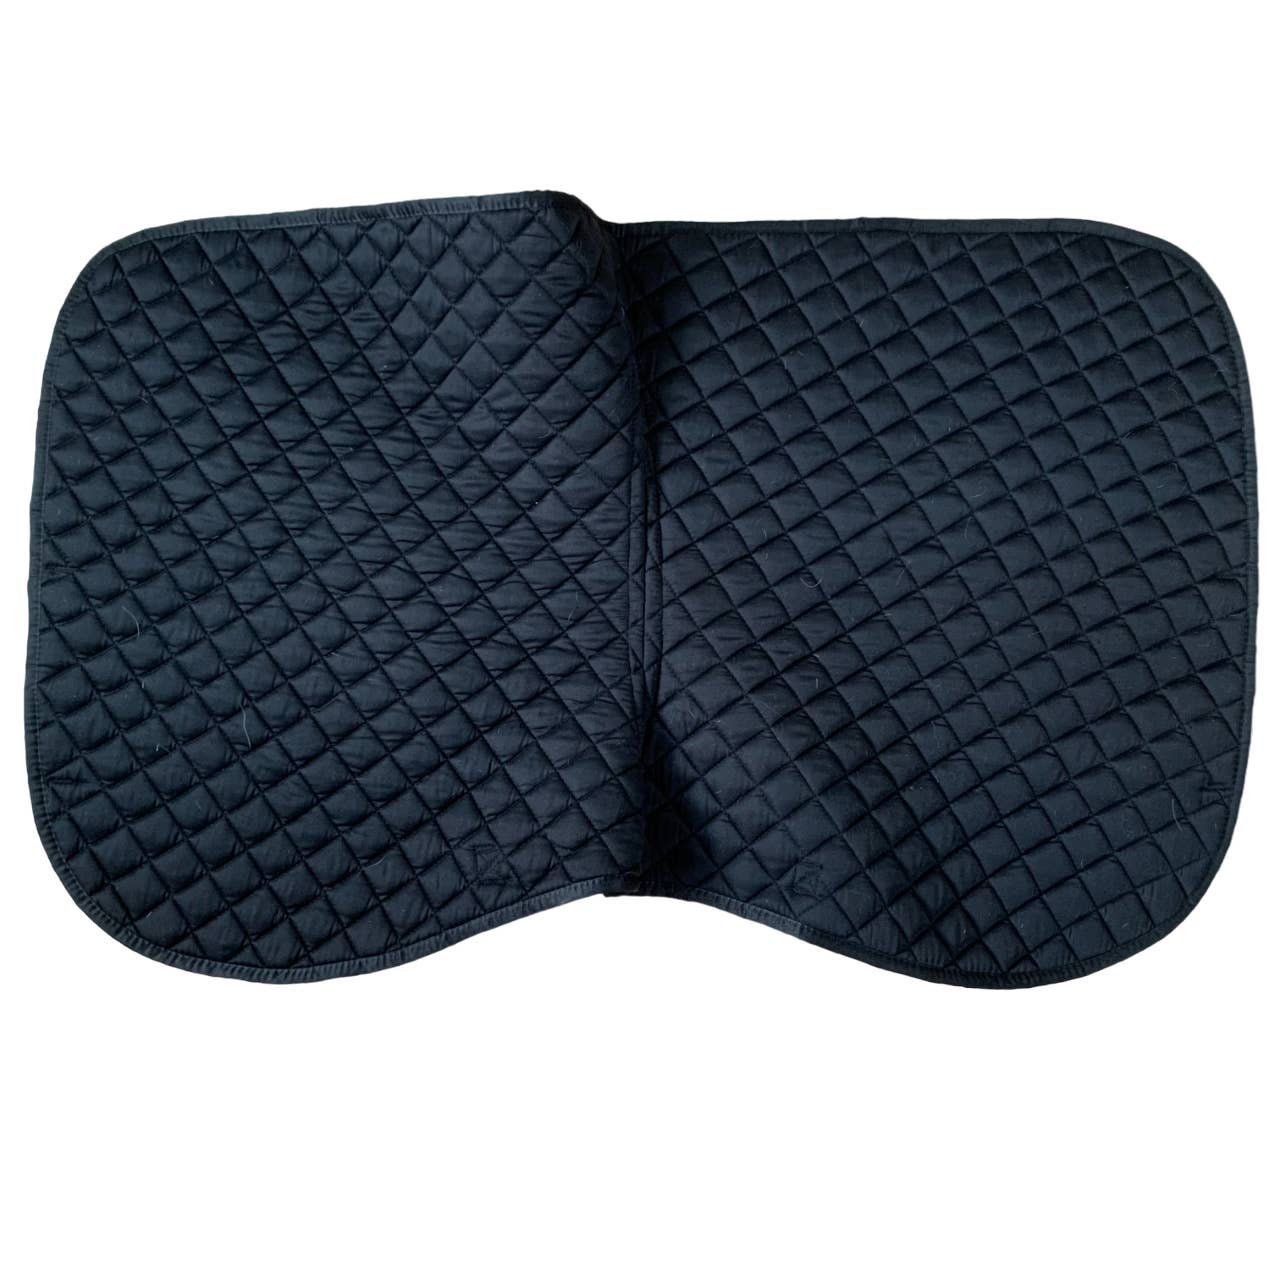 Roma Quilted Dressage Saddle Pad in Black - Full